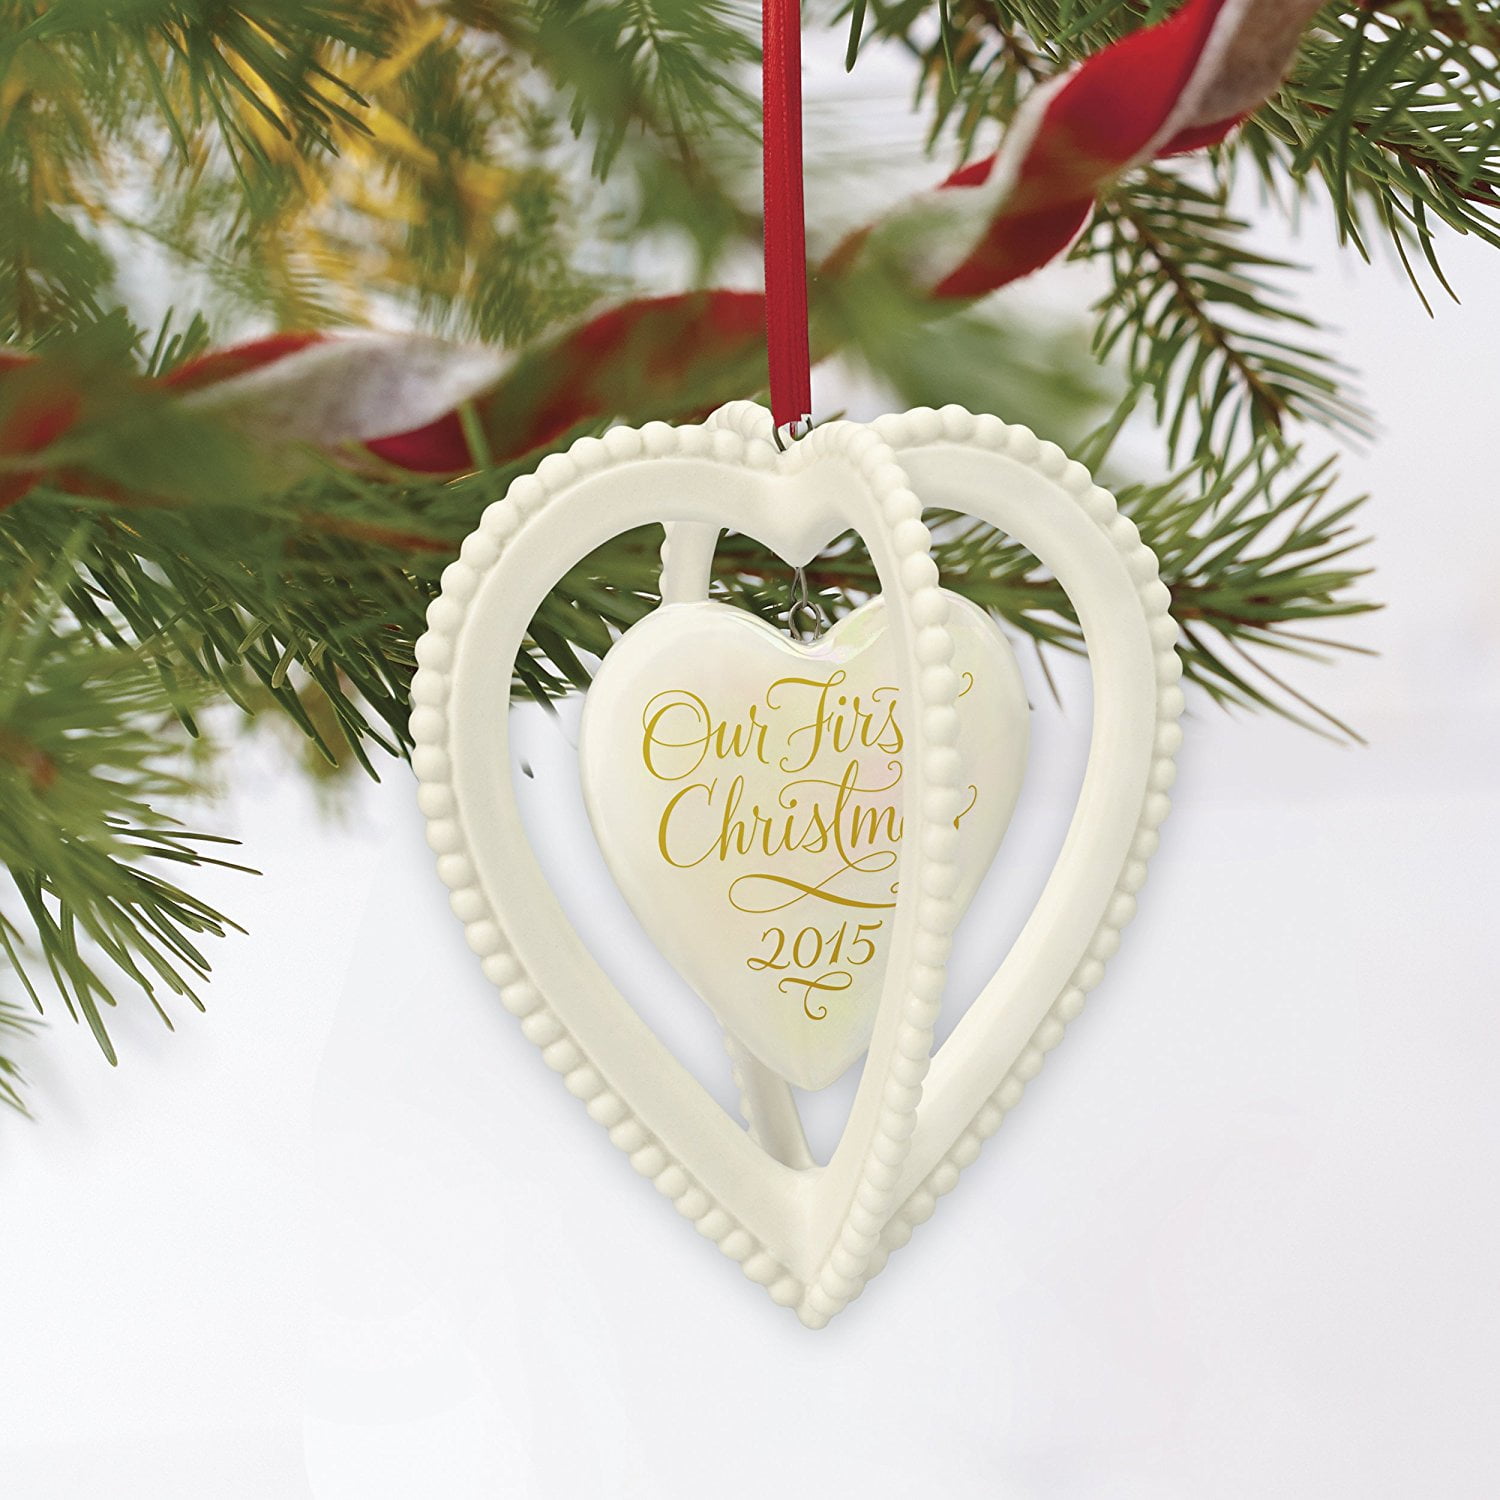 HALLMARK KEEPSAKE ORNAMENTS OUR FIRST CHRISTMAS TOGETHER OR OUR XMAS TOGETHER 